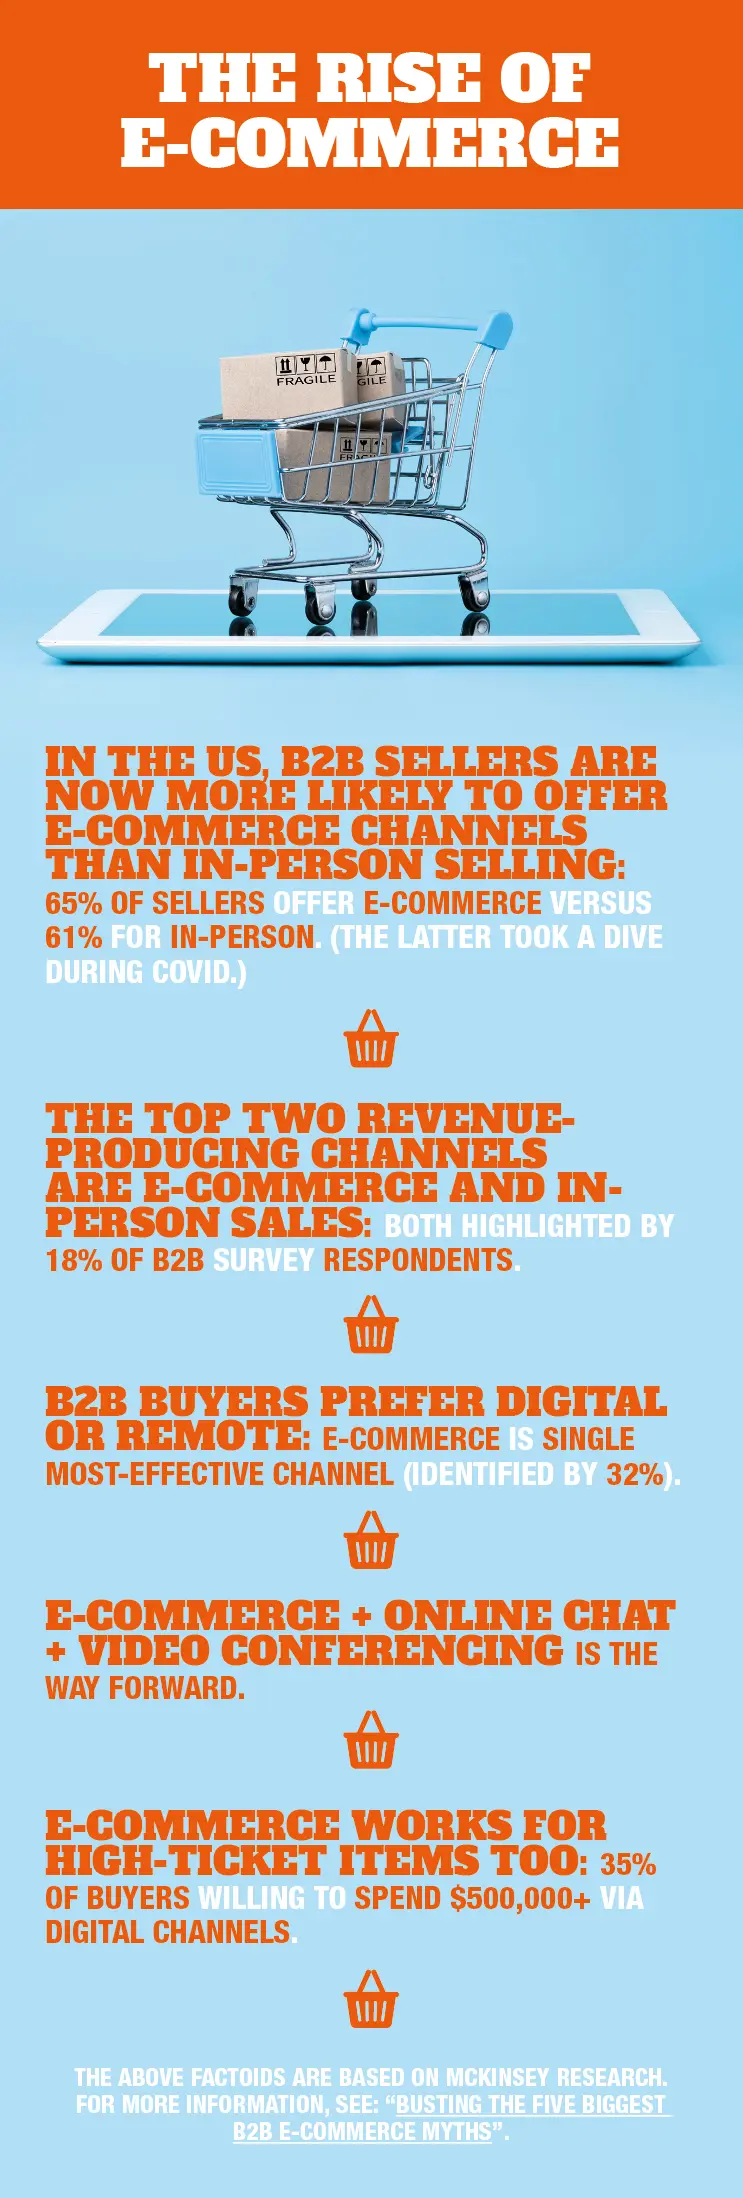 The rise of e-commerce